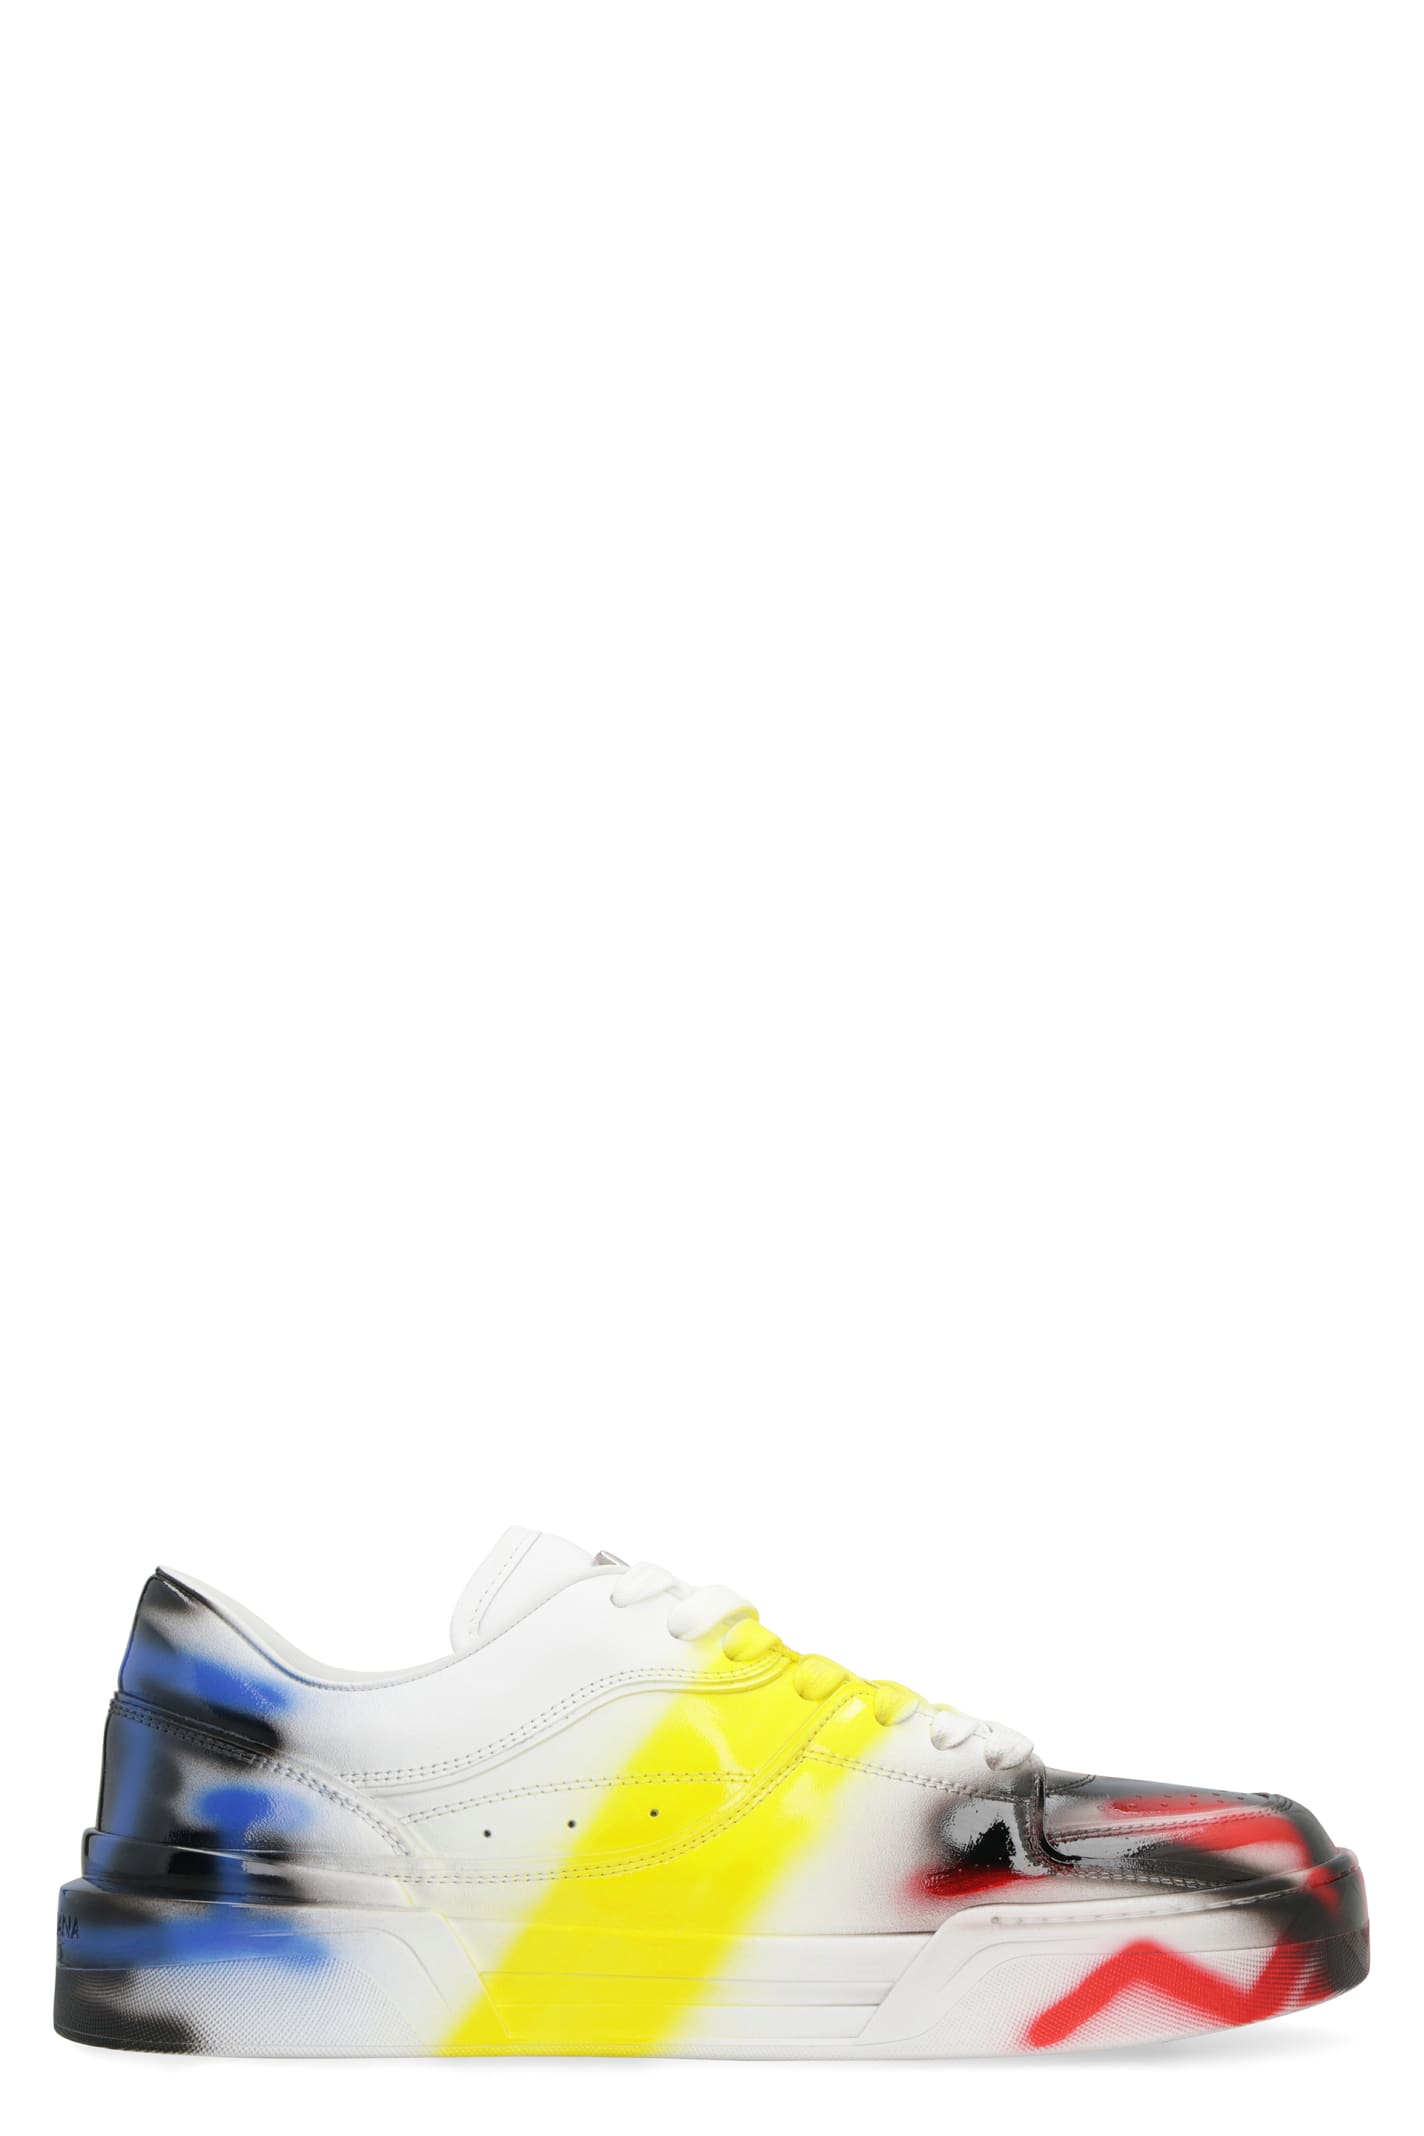 Dolce & Gabbana New Roma Low-top Sneakers